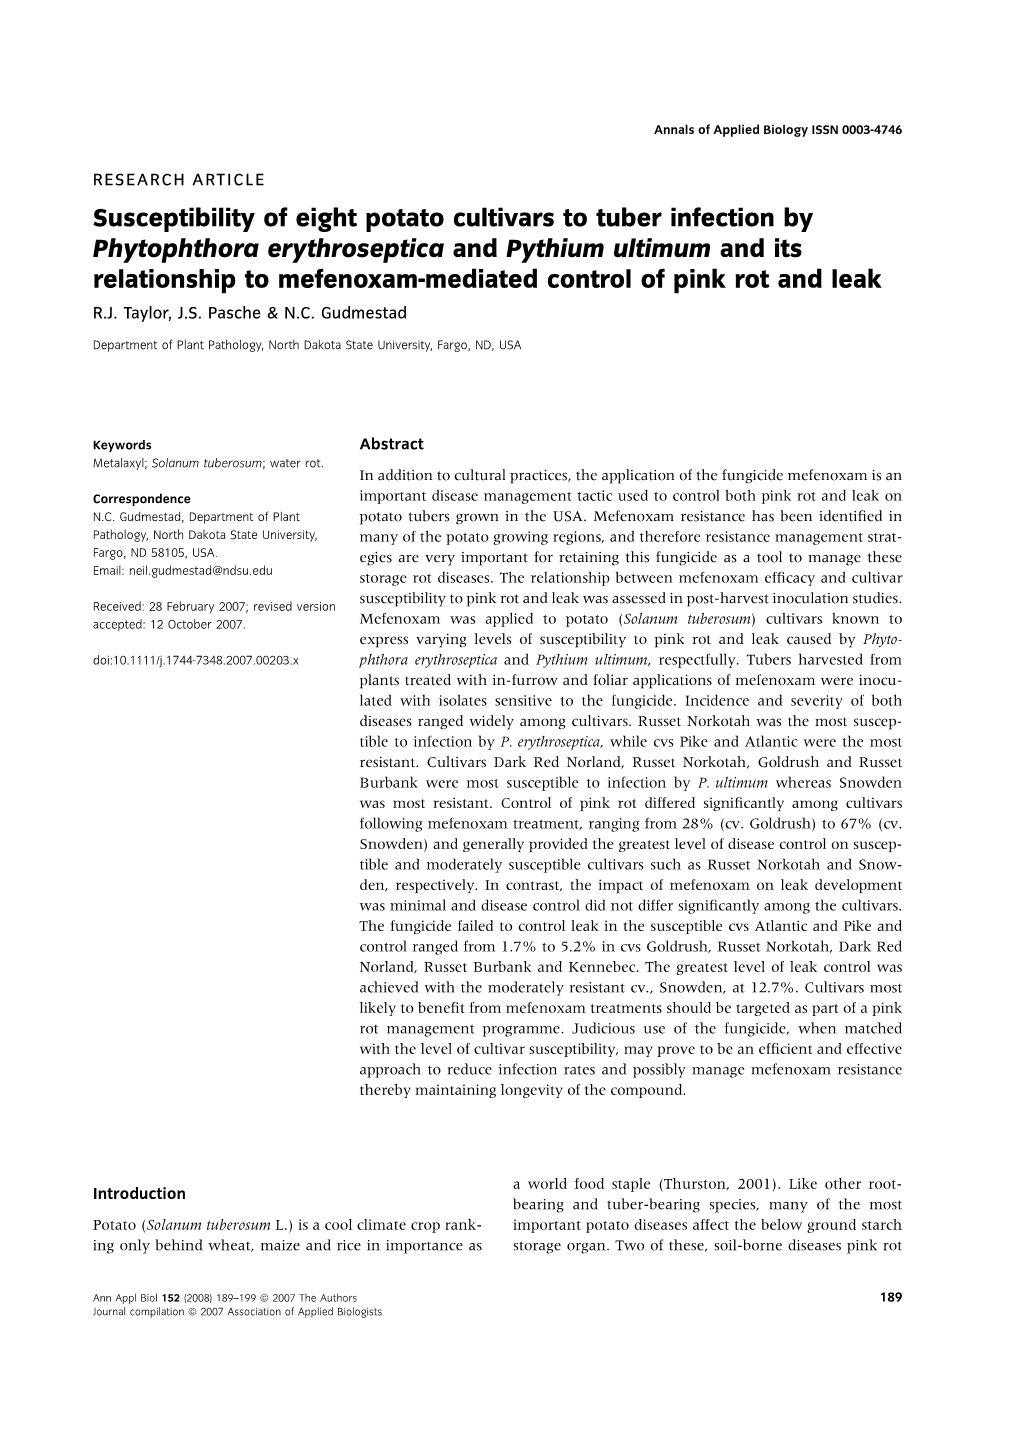 Susceptibility of Eight Potato Cultivars to Tuber Infection by Phytophthora Erythroseptica and Pythium Ultimum and Its Relations